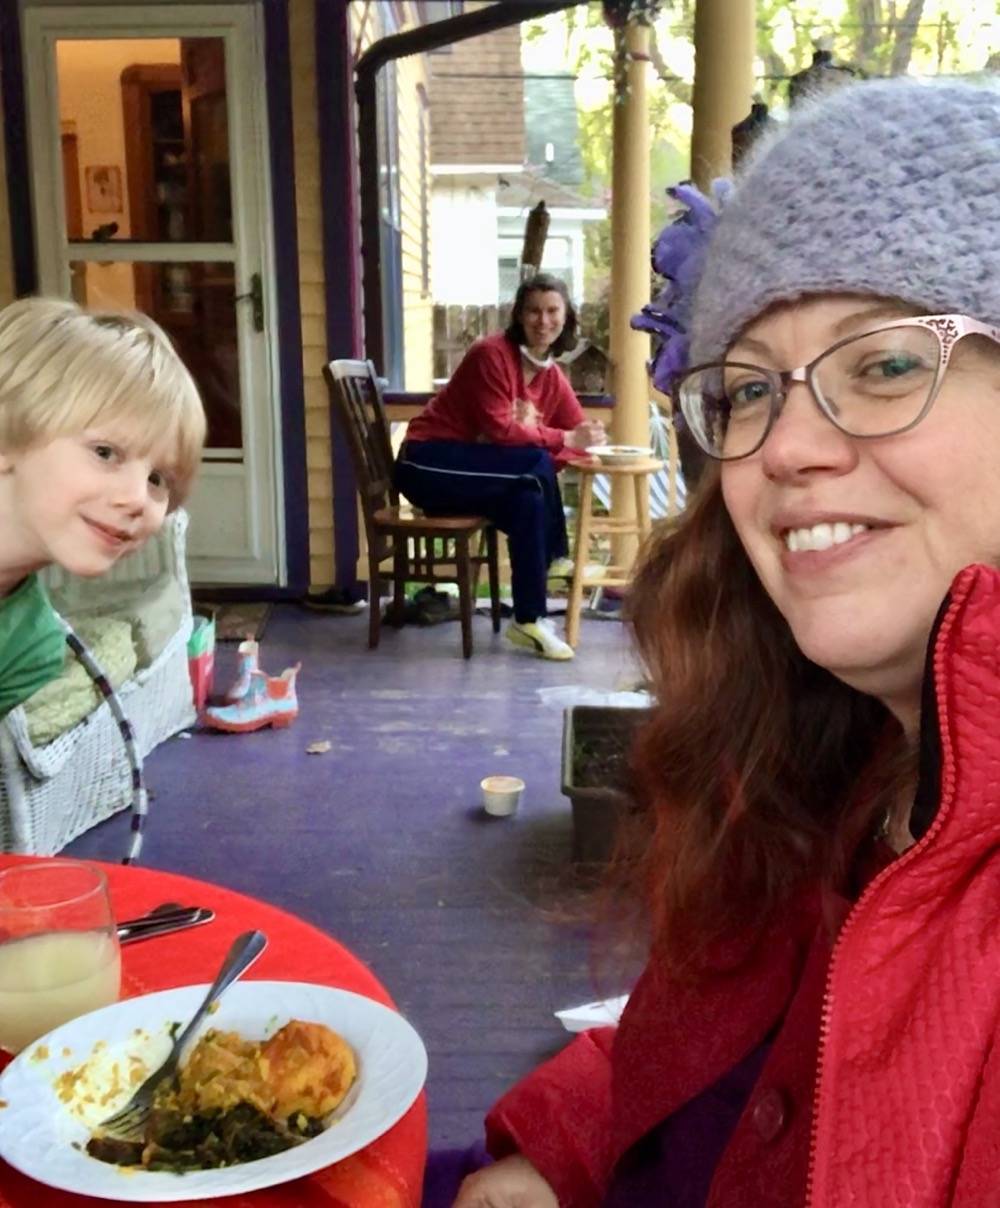 On a large front porch, Danielle Chynoweth is pictured in the foreground, wearing a knit hat and a red jacket. There are bowls of food on the table in front of her. Her son Ezra is pictured on the left, leaning into the frame. On the other end of the porch is Miriam Larson, who is seated alone and also eating. Photo by Danielle Chynoweth. 